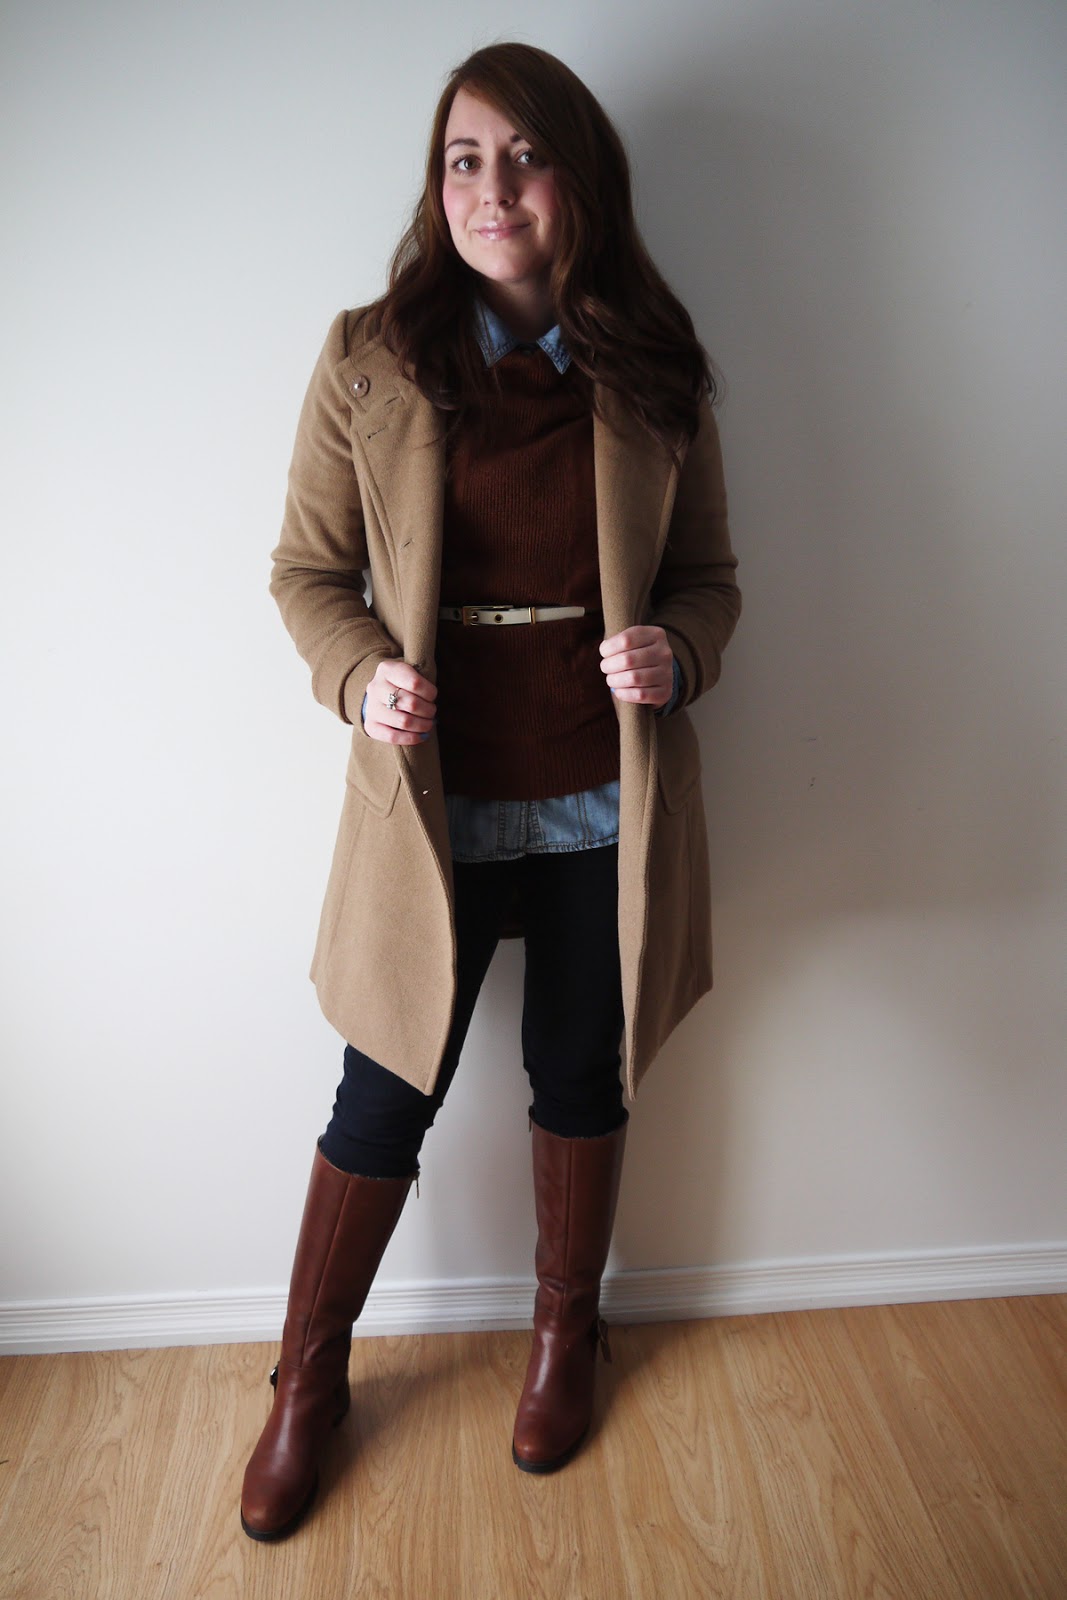 Casual Outfit Challenge (Denim + Brown + Tan) | Closet Full of Thrills